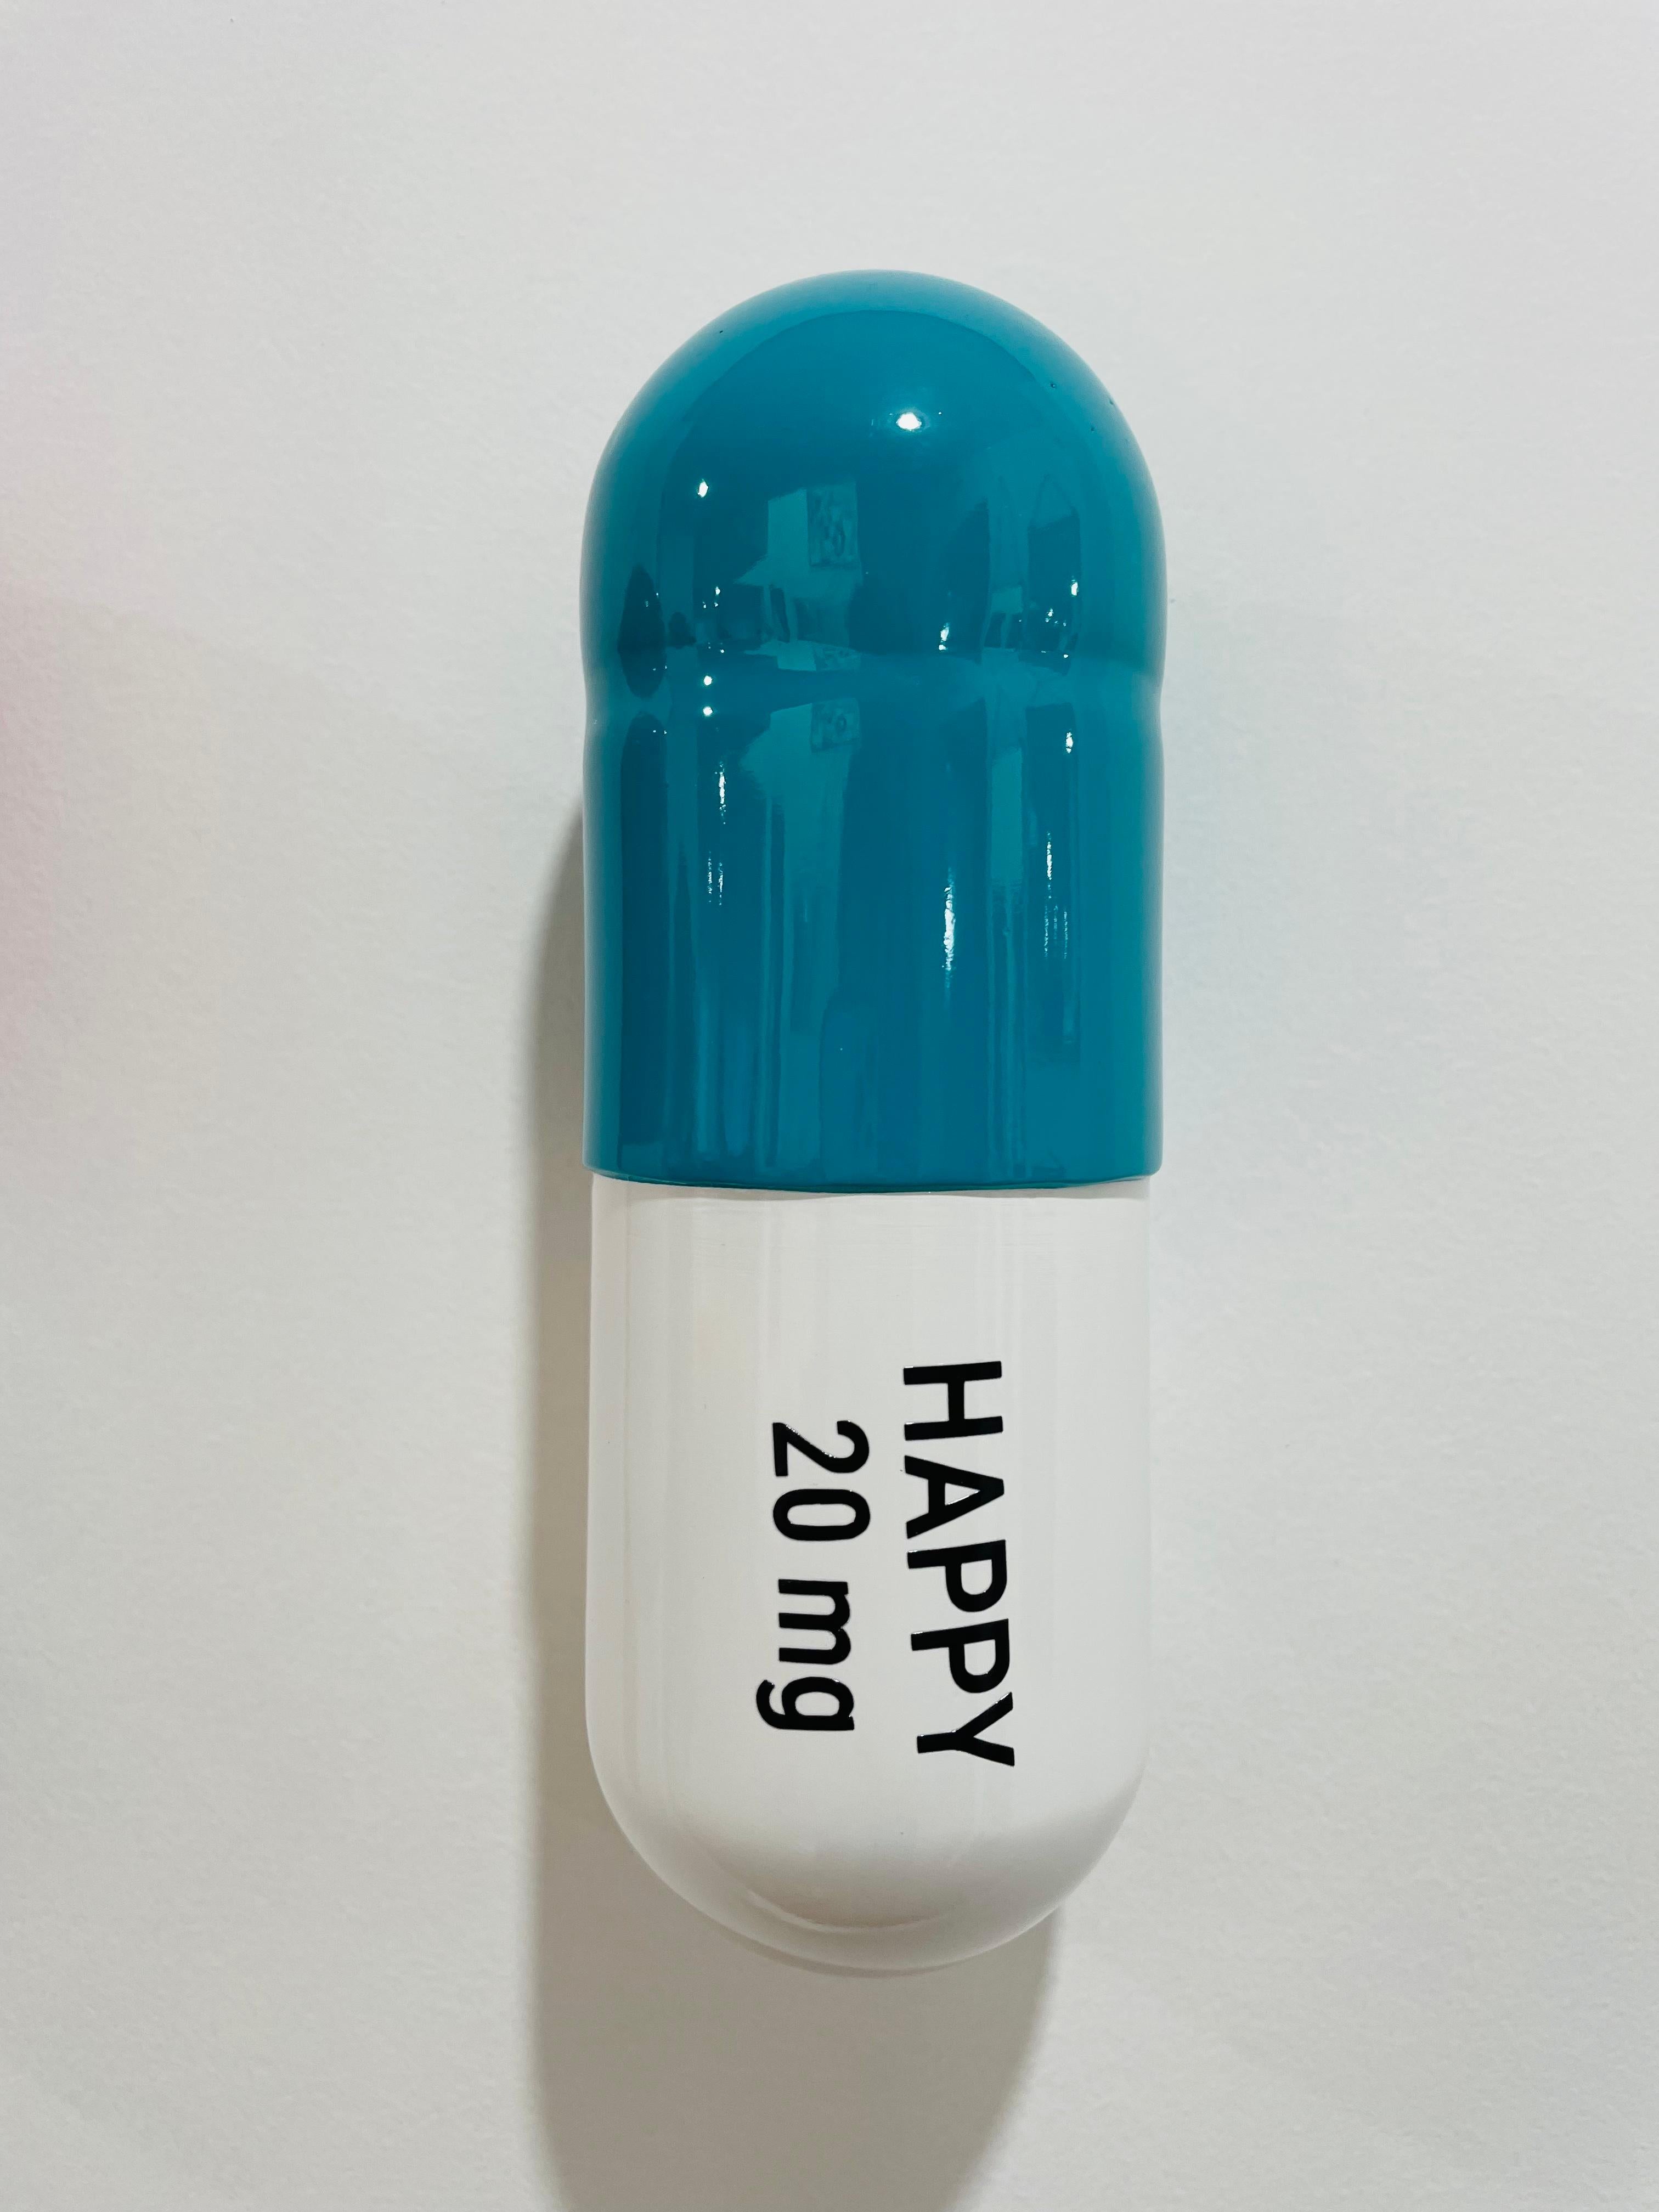 adderall red and blue capsule